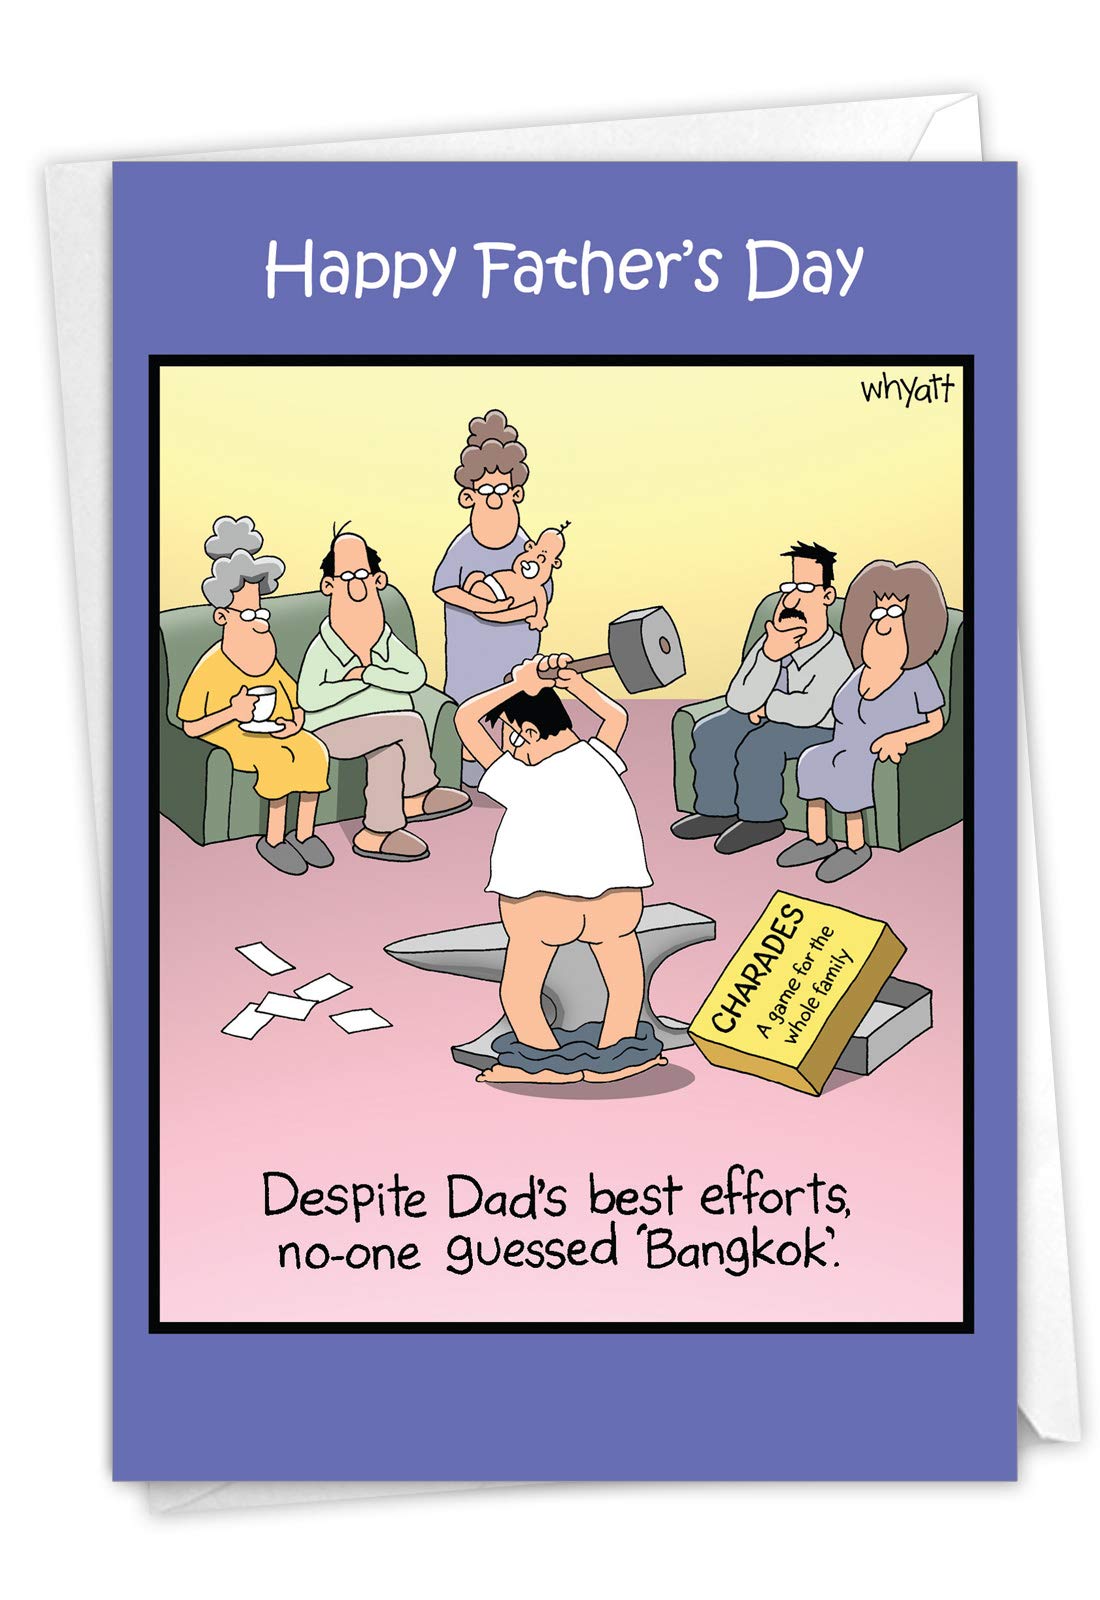 funny happy fathers day images